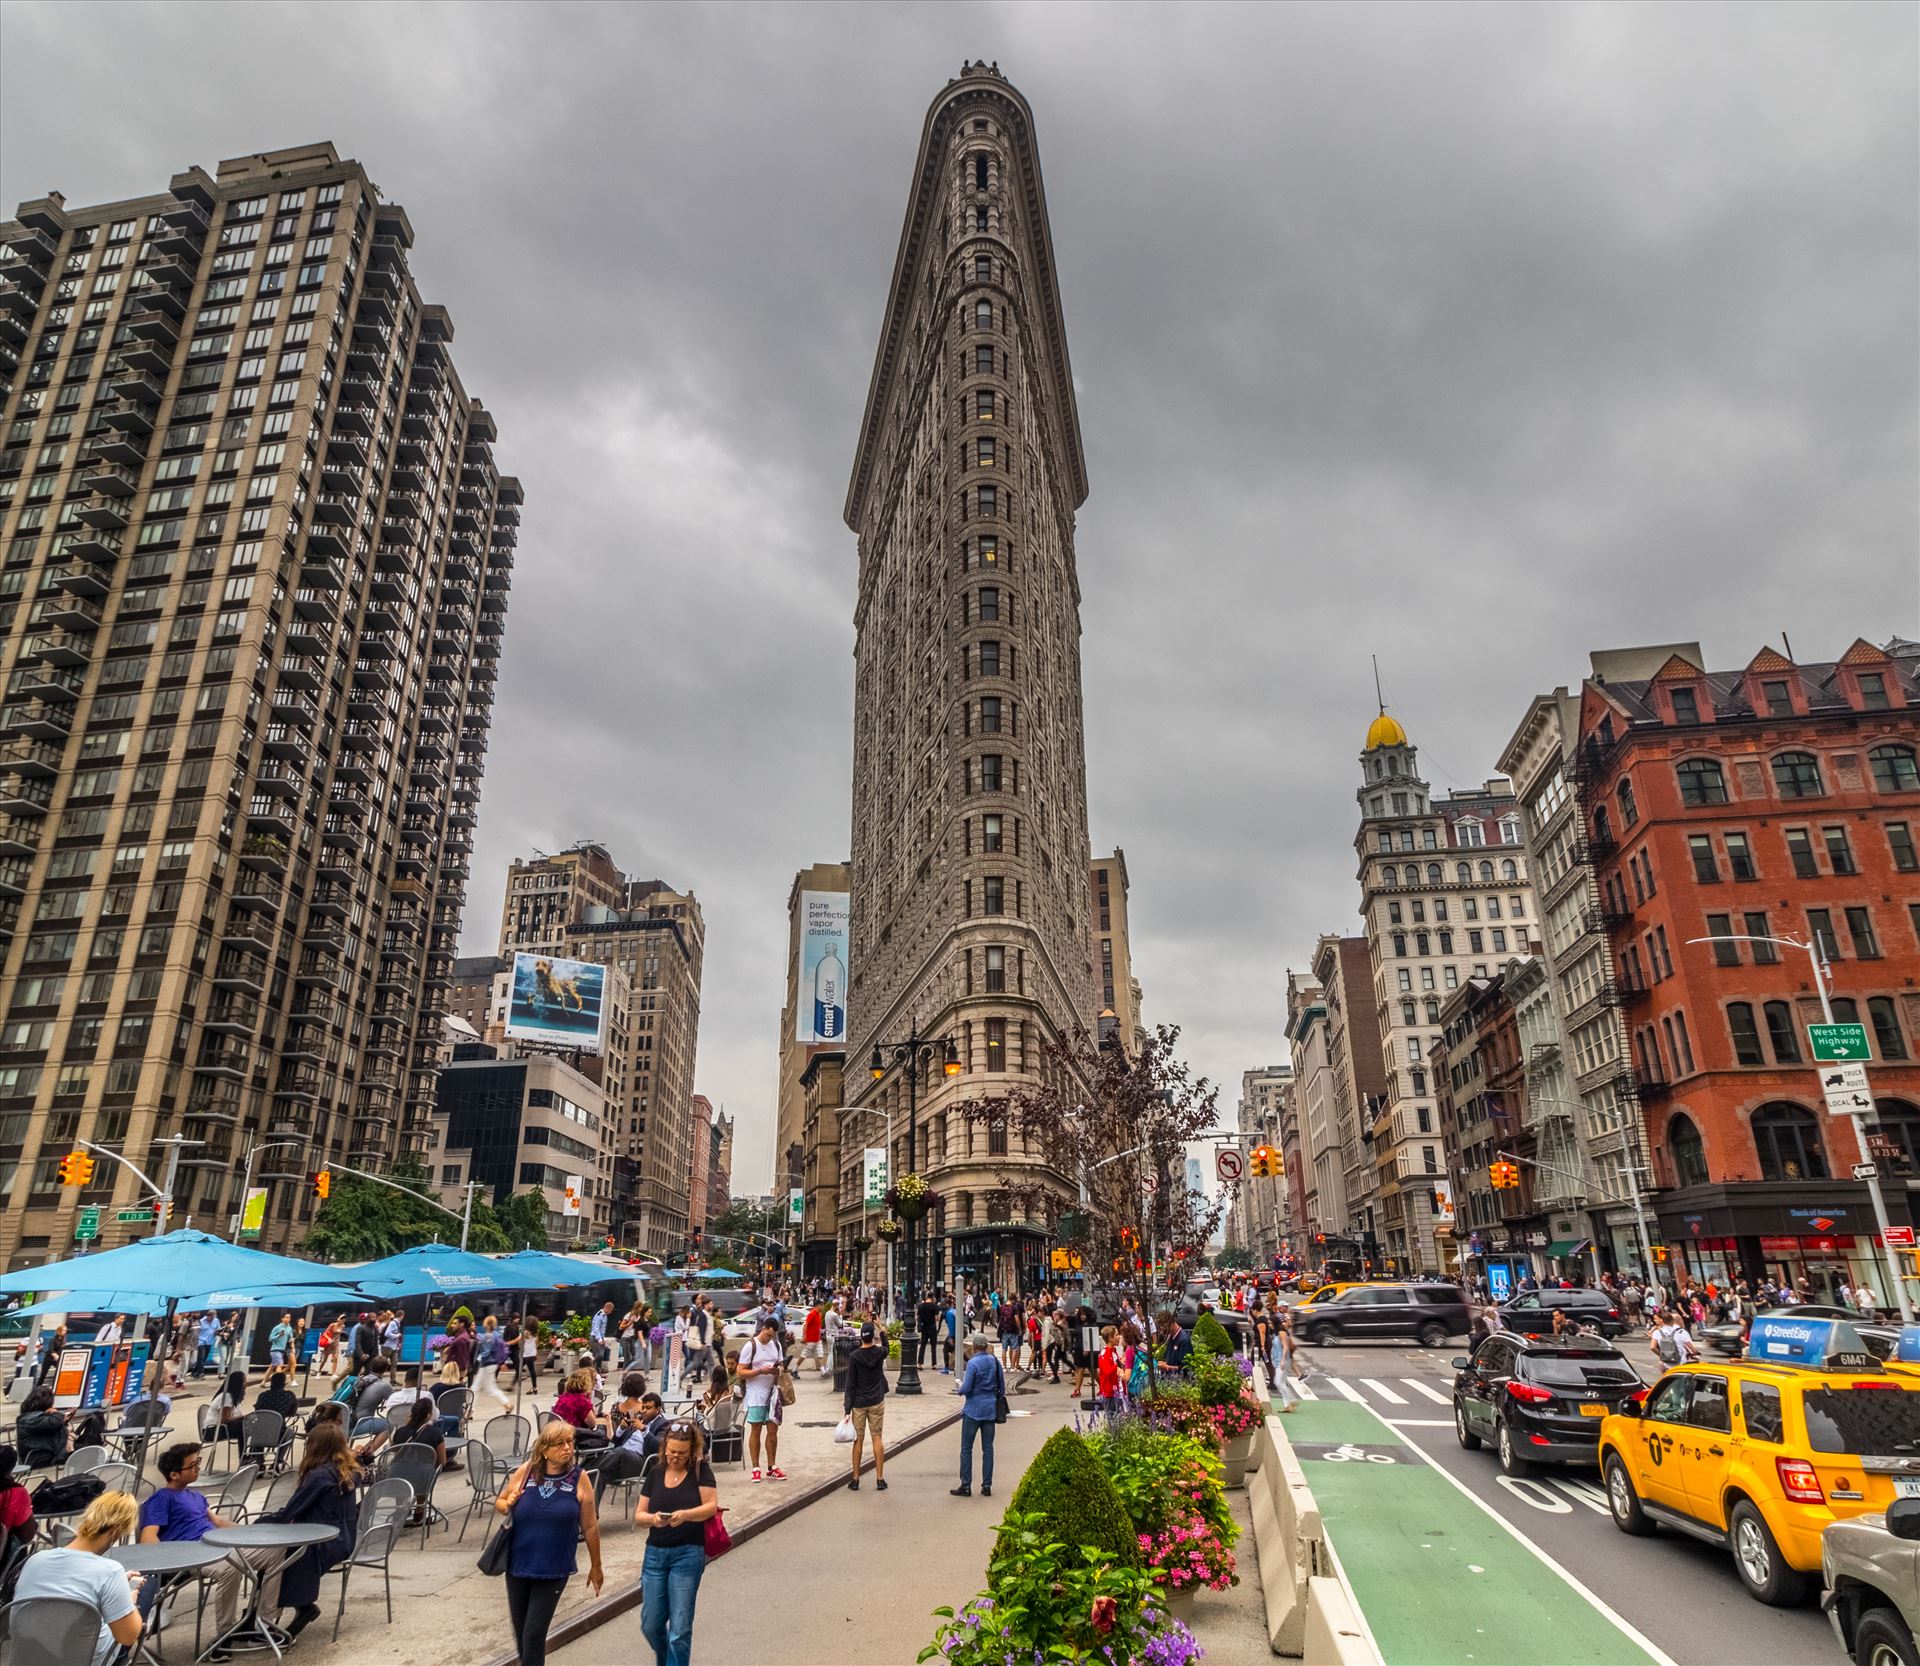 The Flatiron Building in New York The Flatiron building is one of the most iconic buildings in Manhattan in New York and is obviously named after the "iron" like shape. It was formerly the Fuller Building.  by Tony Keogh Photography